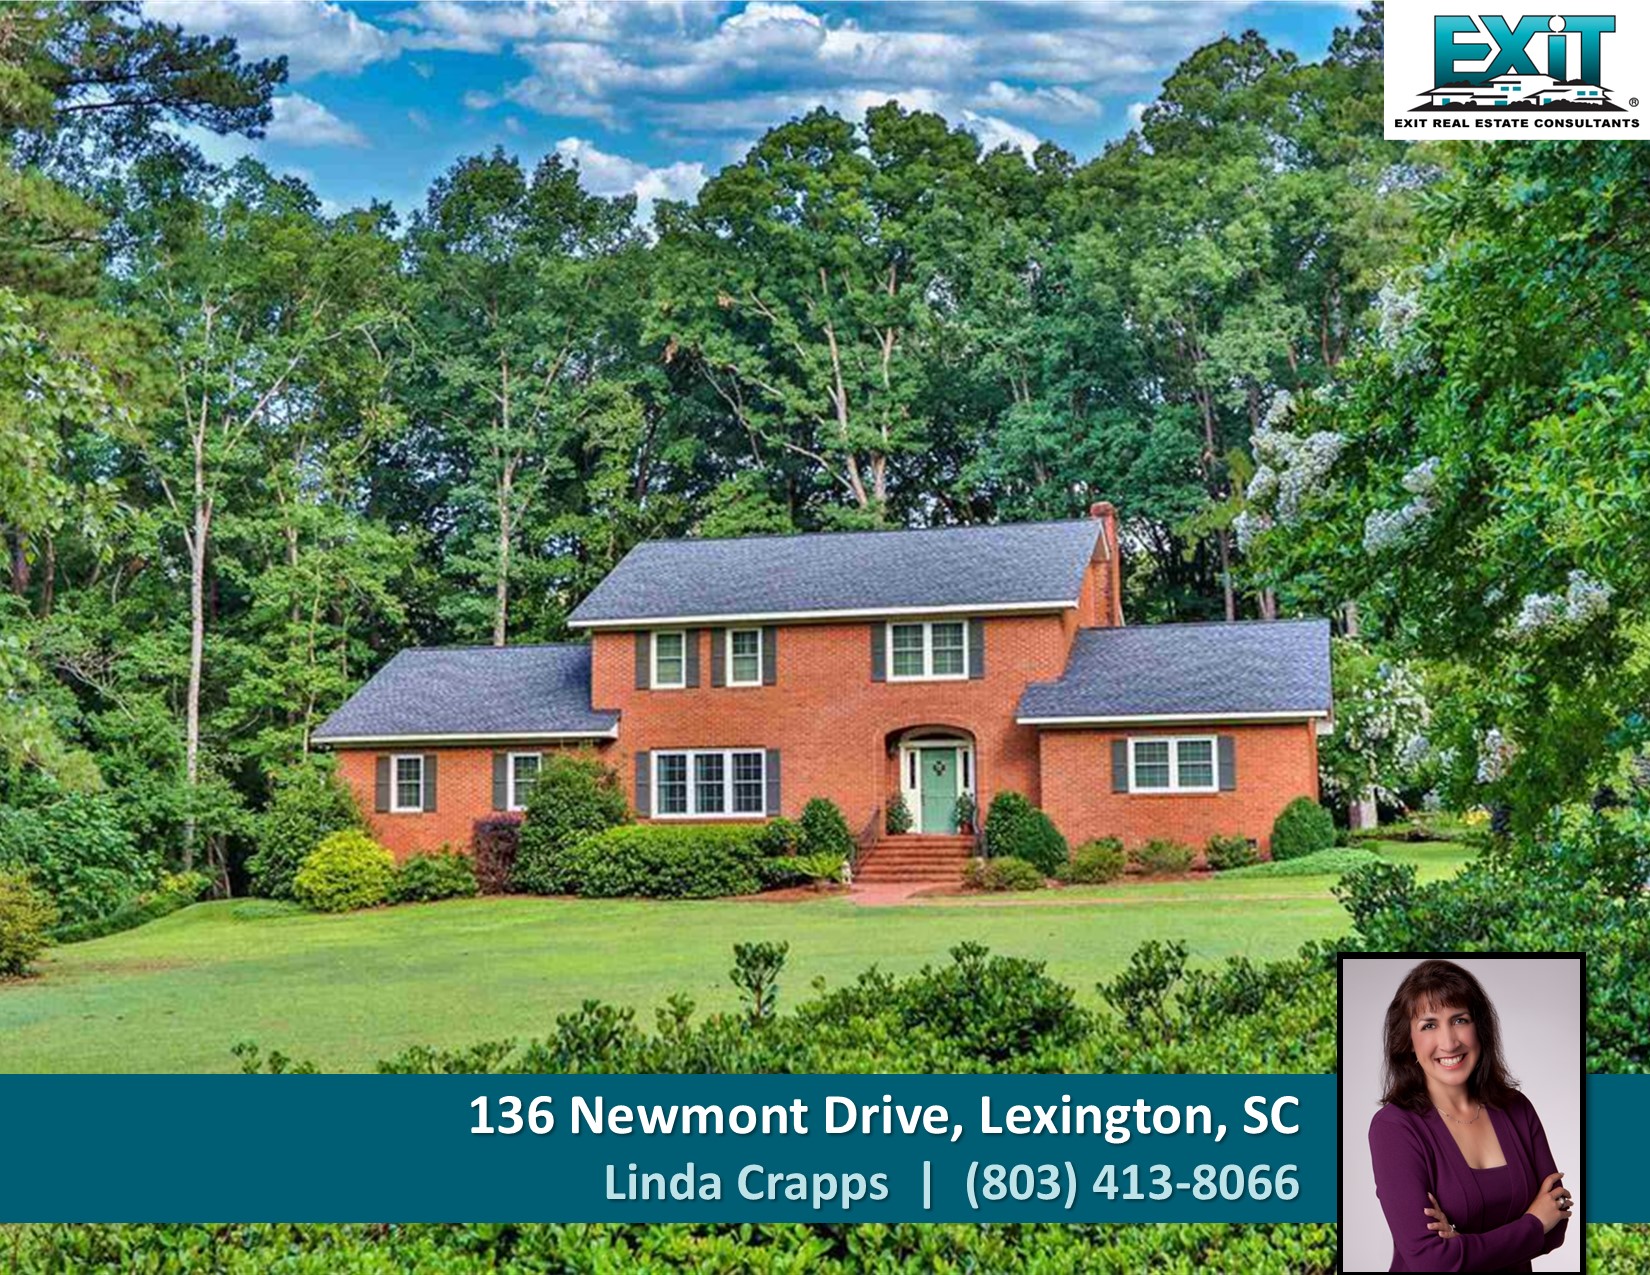 Just listed in Newmont